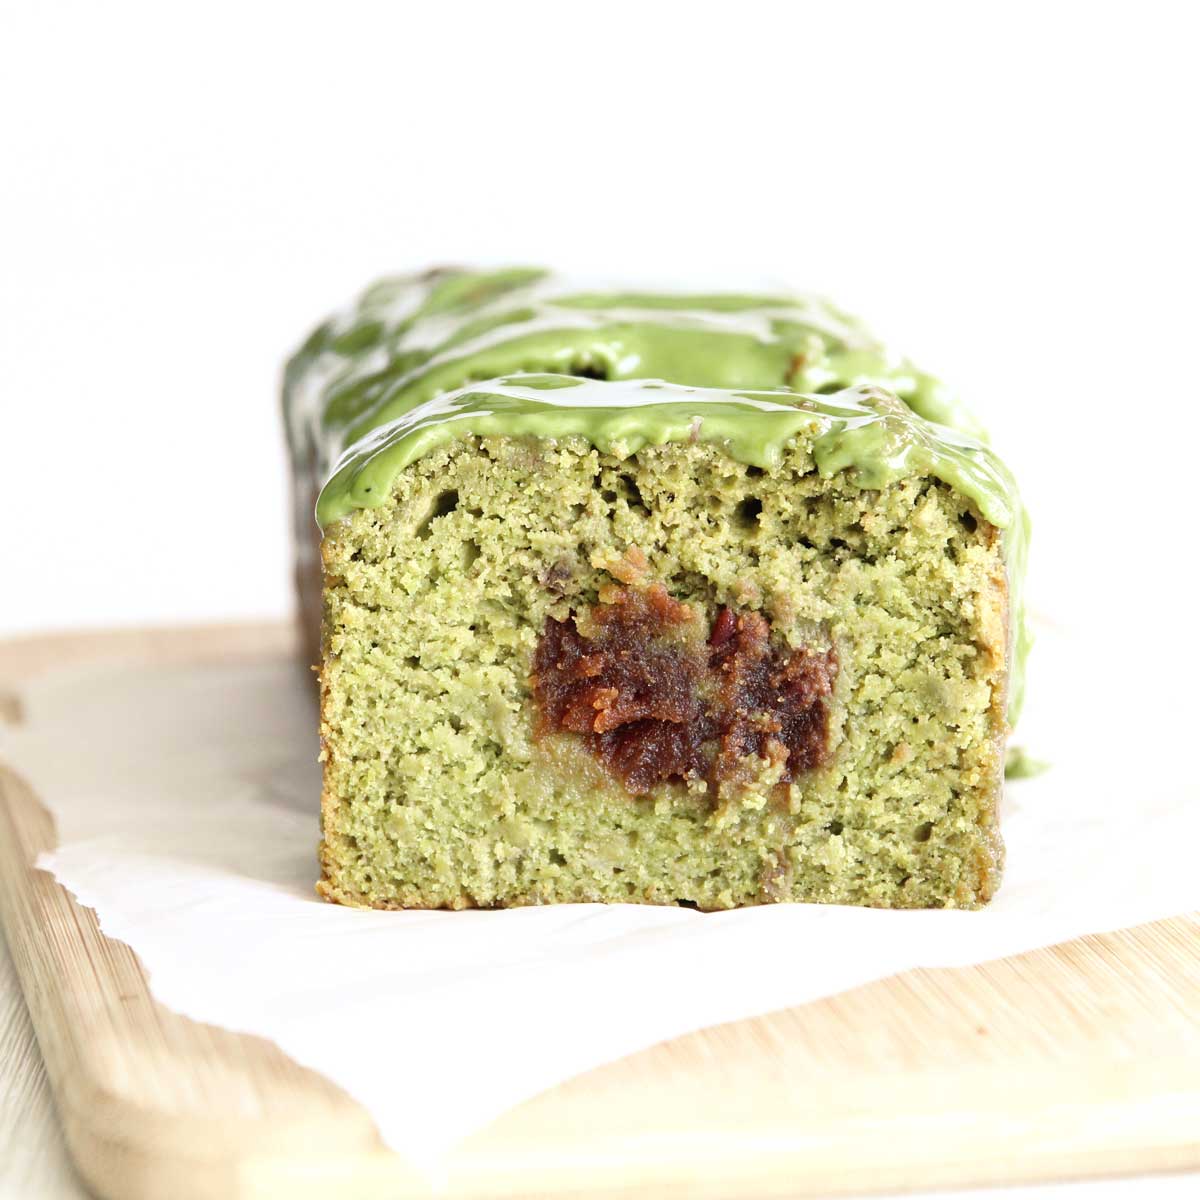 How to Make Matcha Banana Bread with Red Bean Paste Filling - Peanut Butter Banana Bread